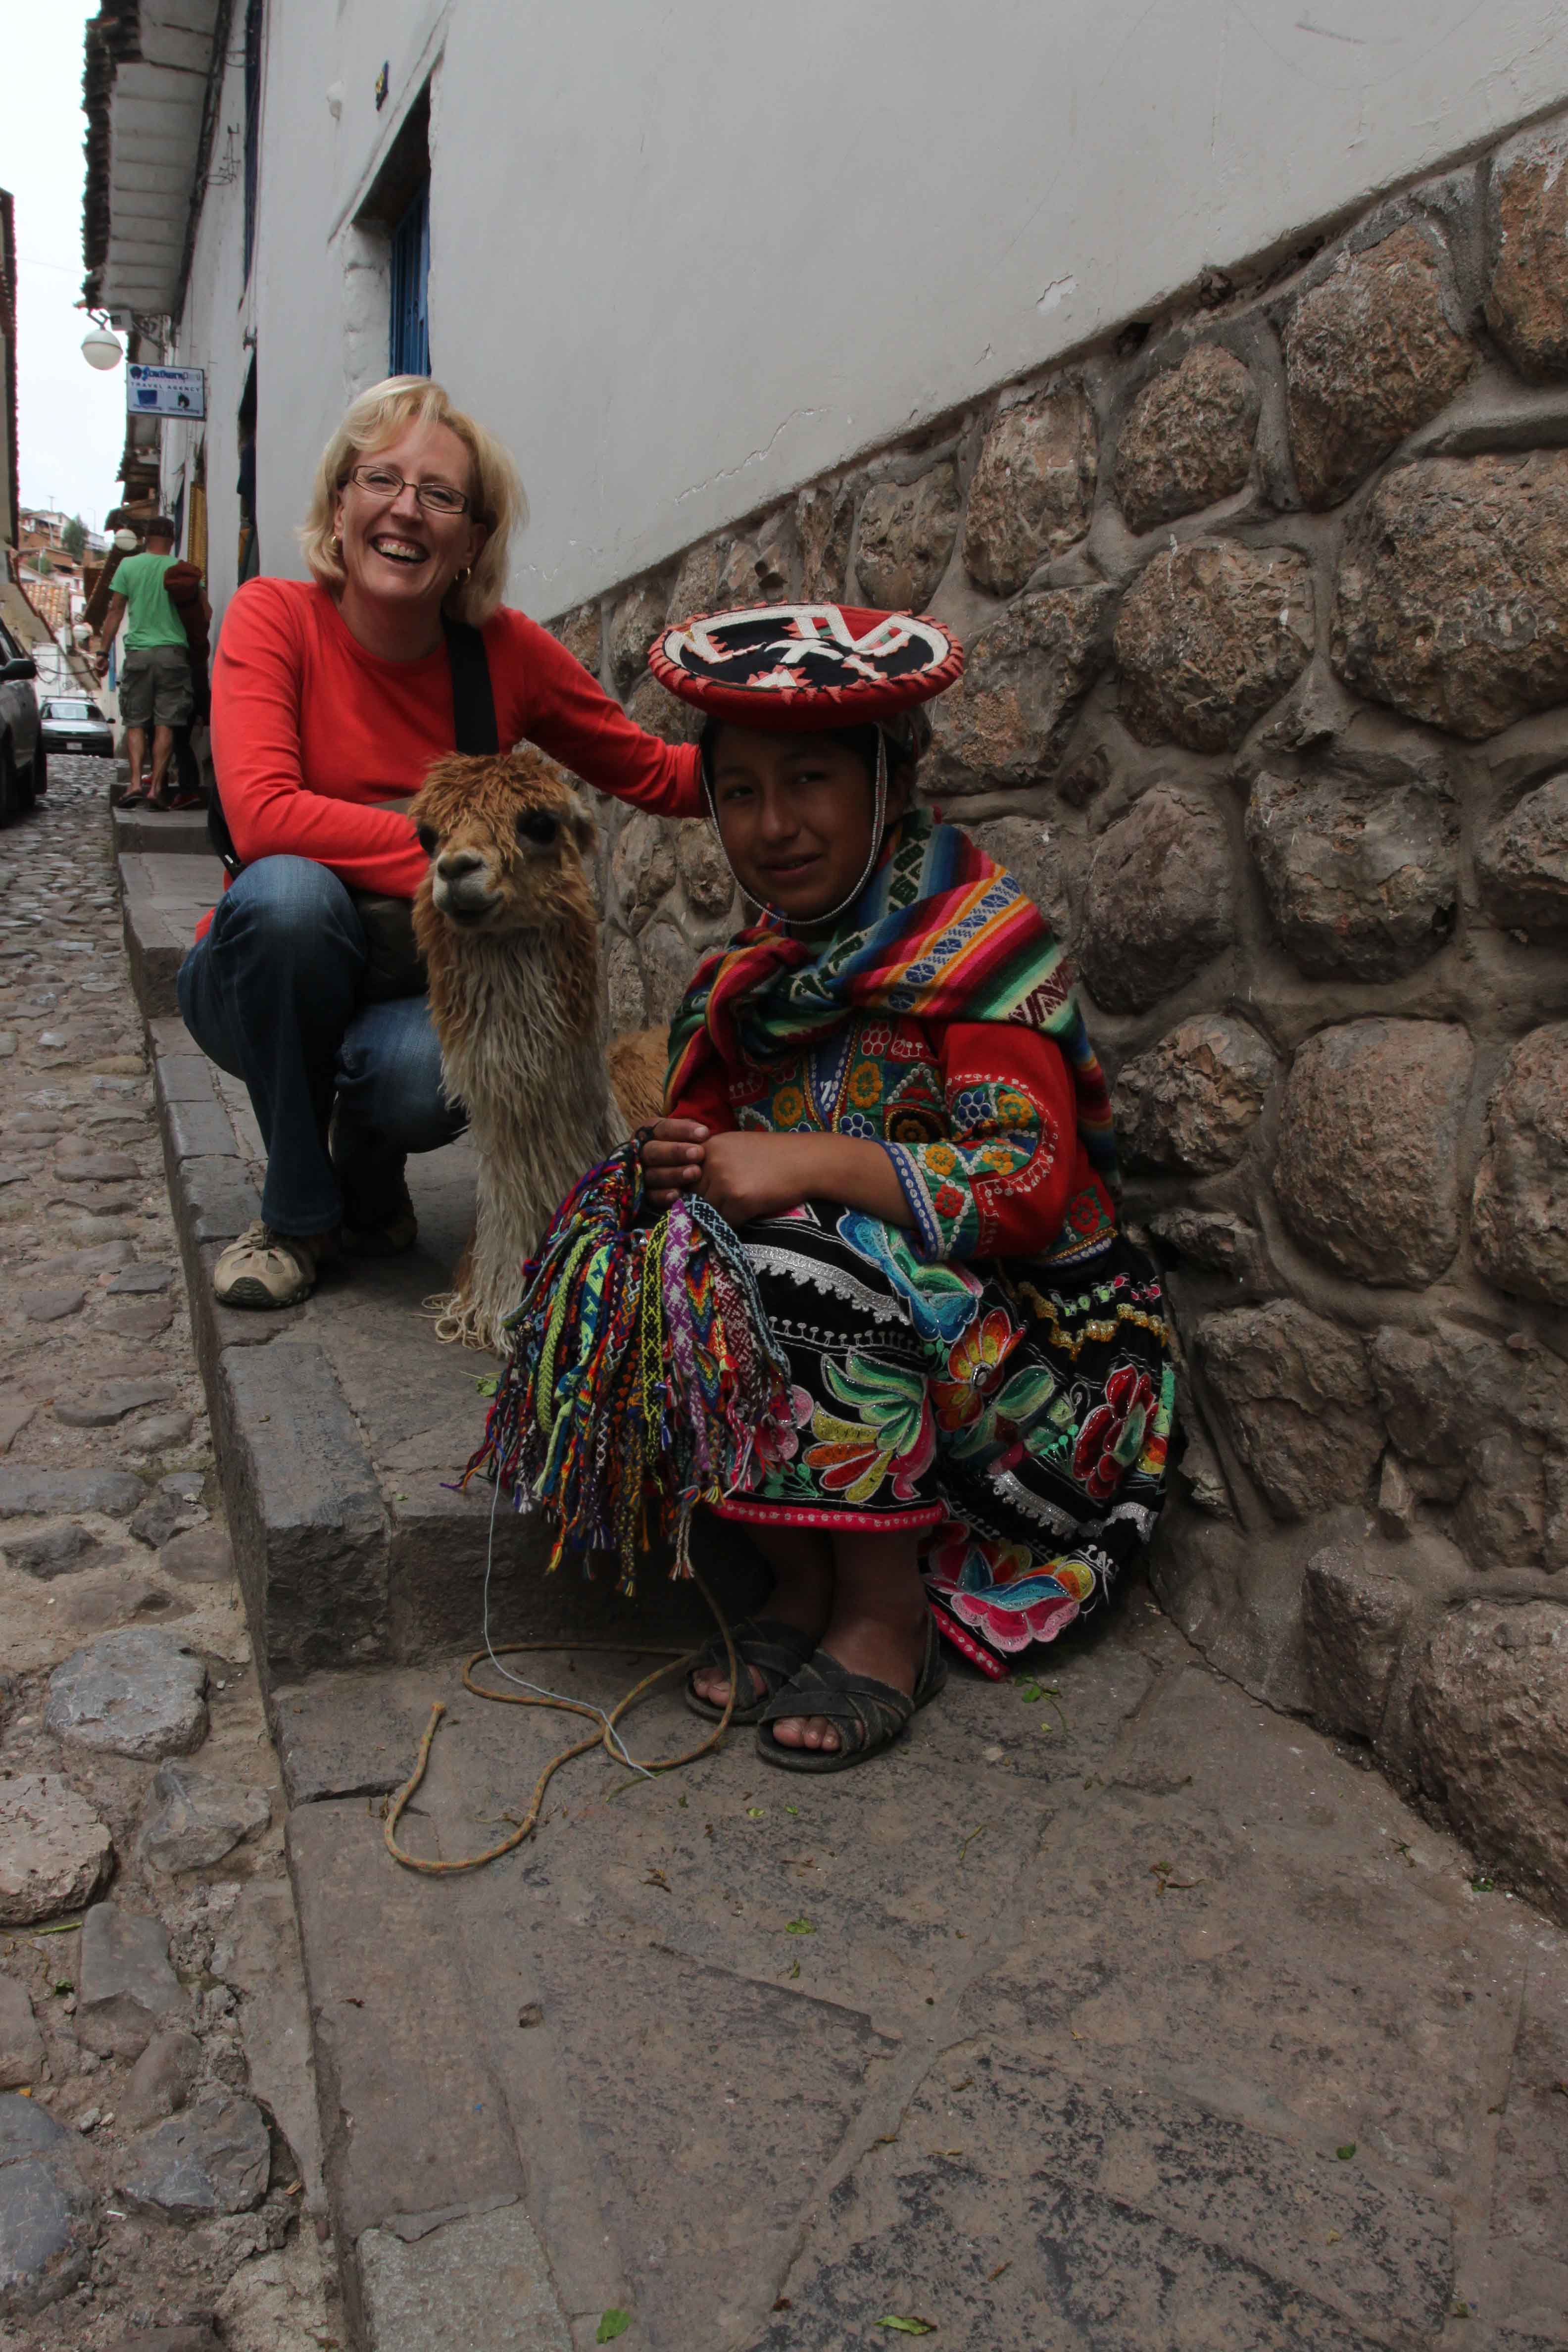 Nic and indigenous Peruvian girl in traditional dress...and her llama